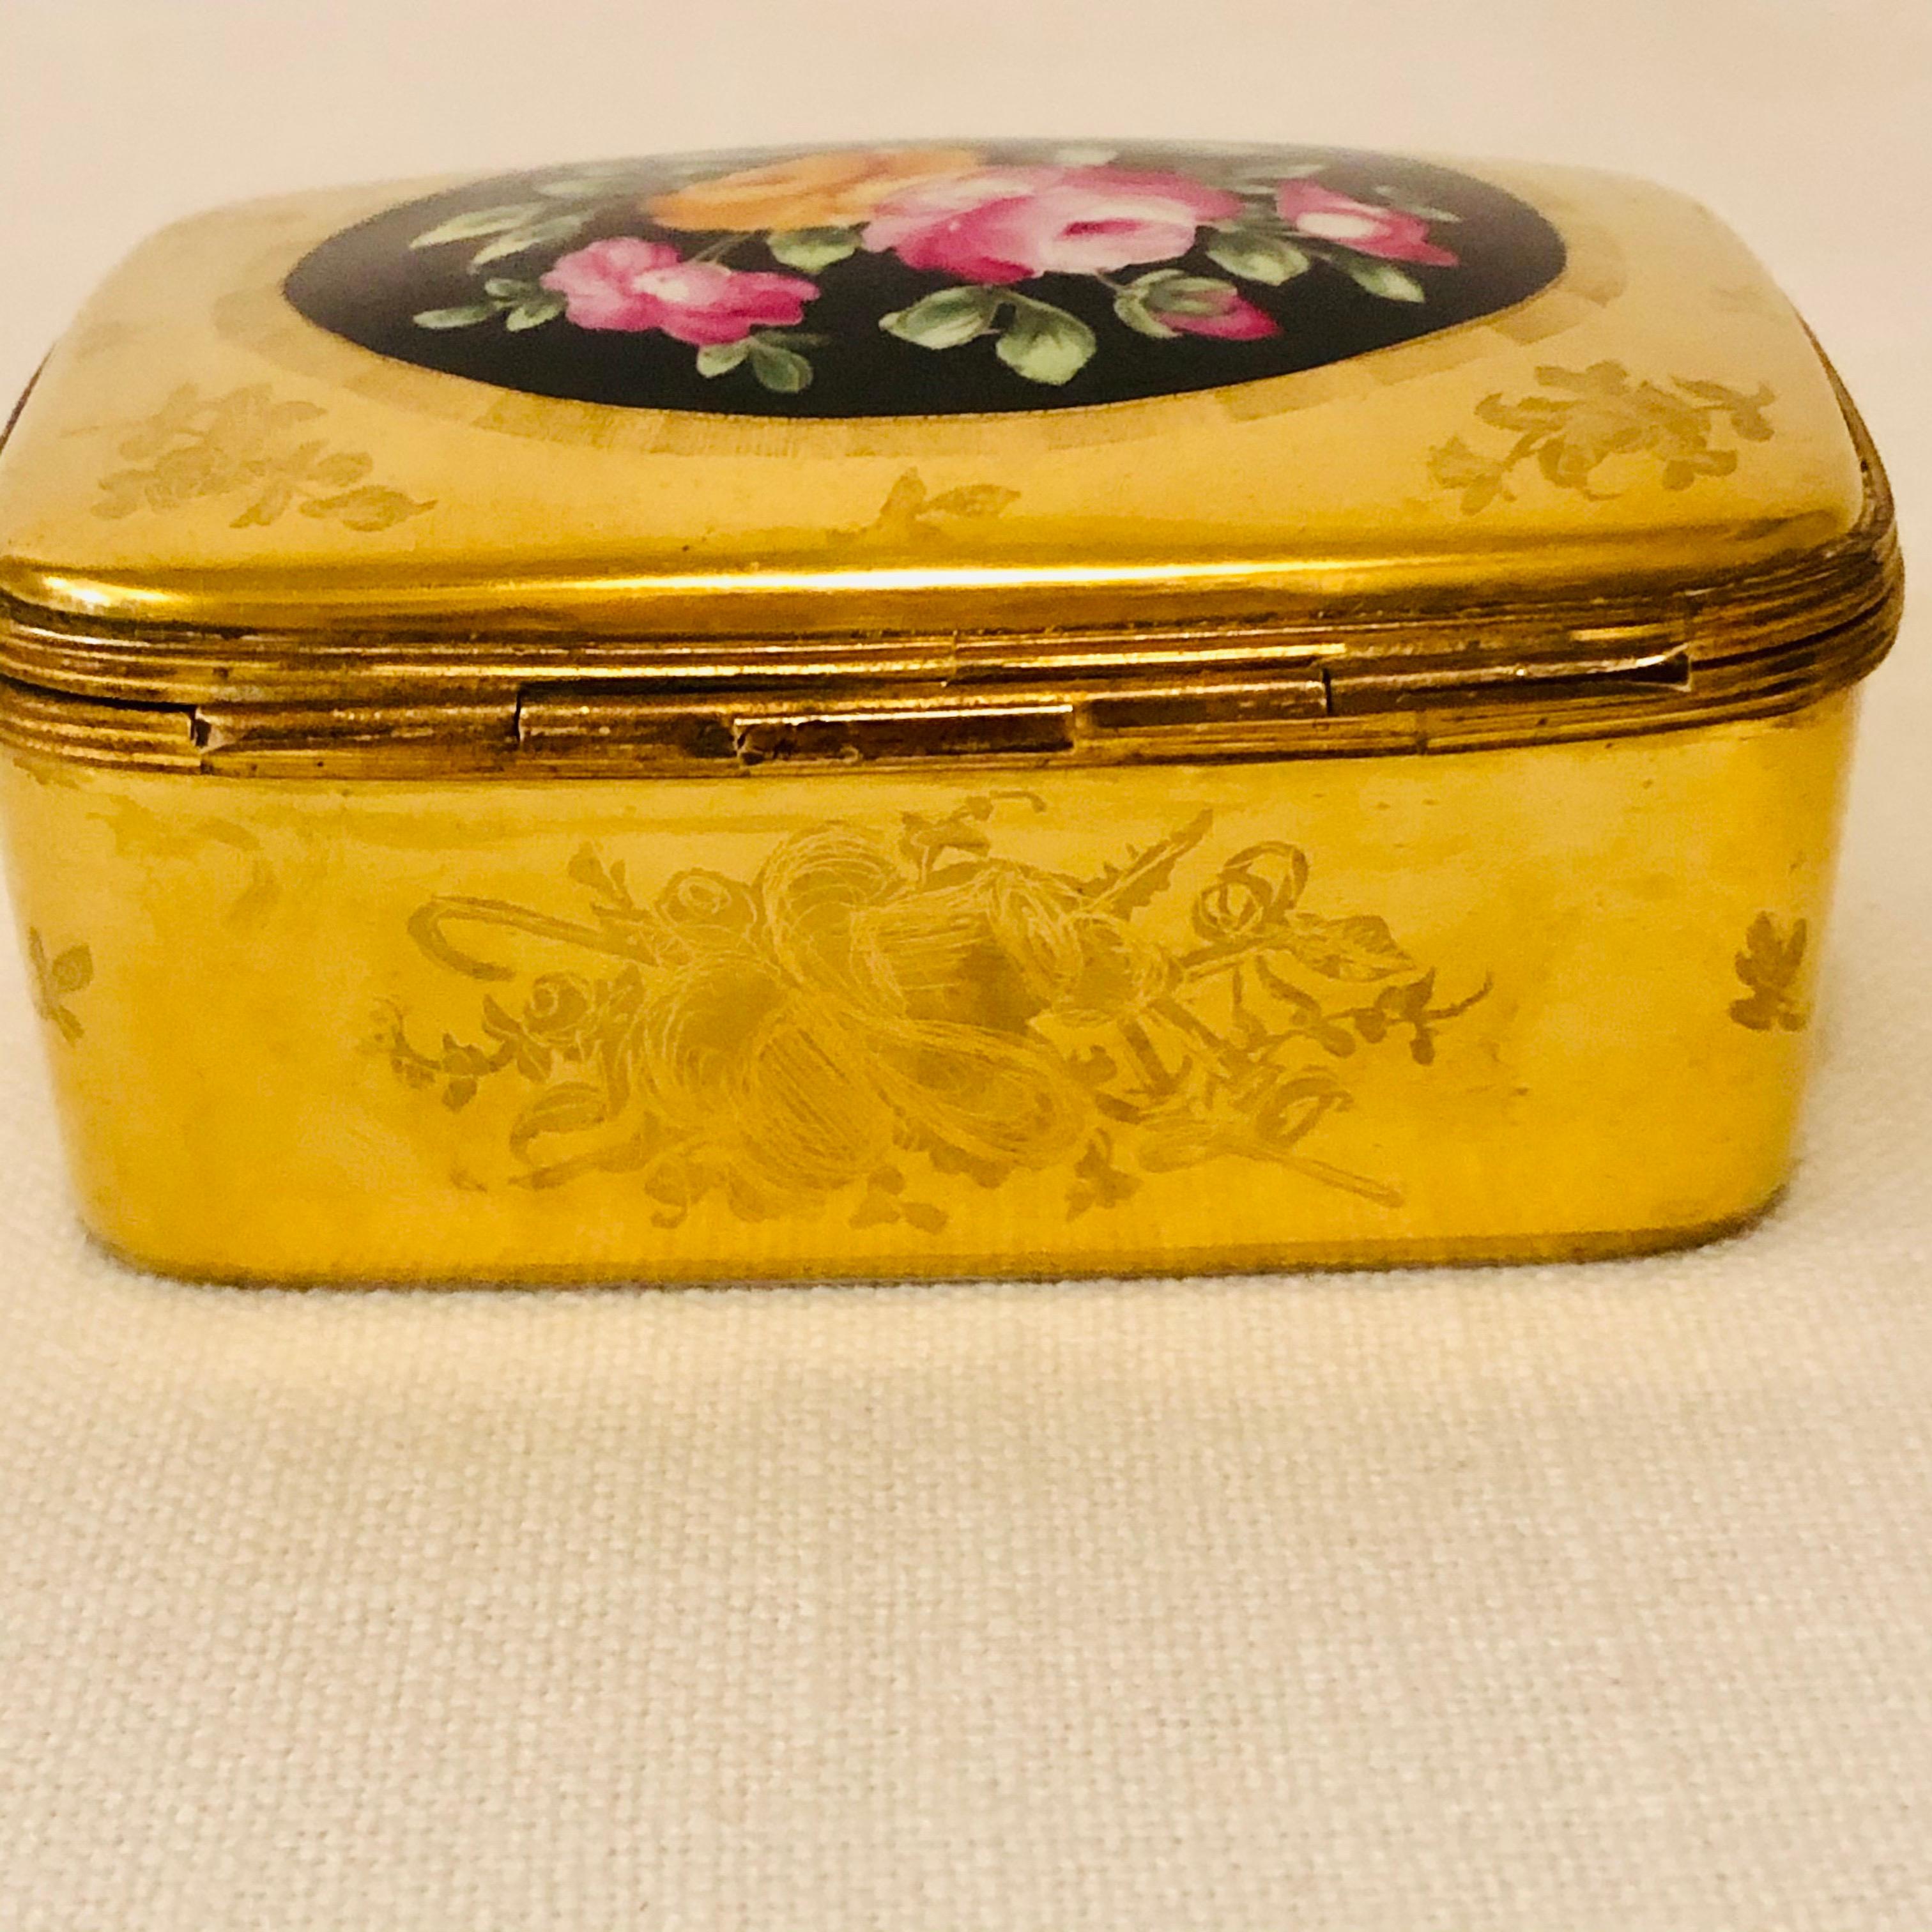 Le Tallec Box with a Gold BackGround and a Central Painting of a Flower Bouquet 8